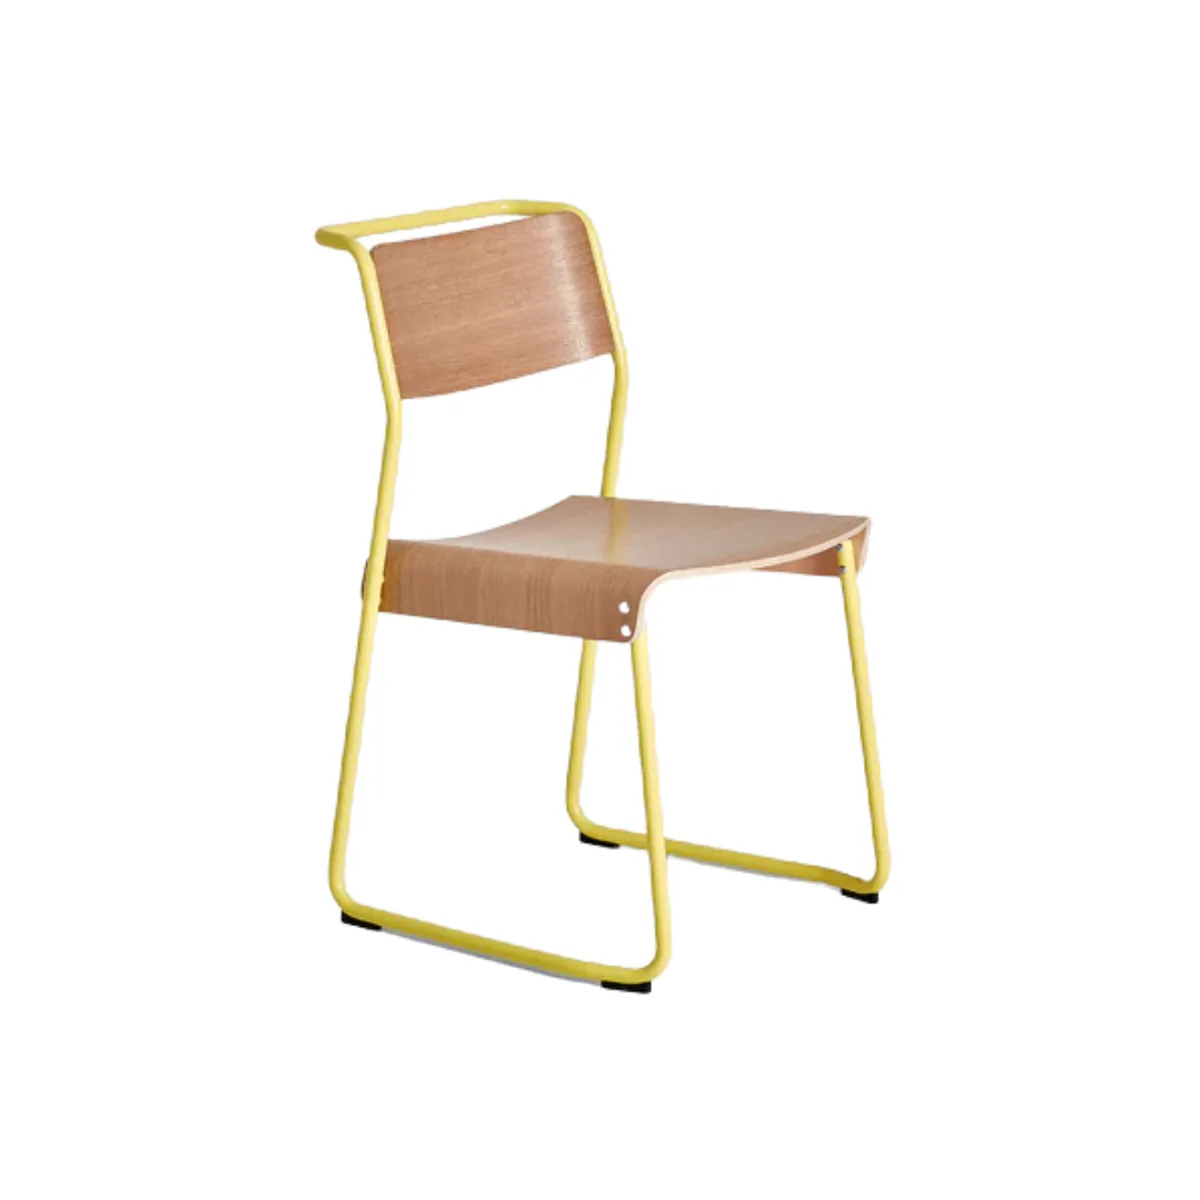 Utility side chair 4